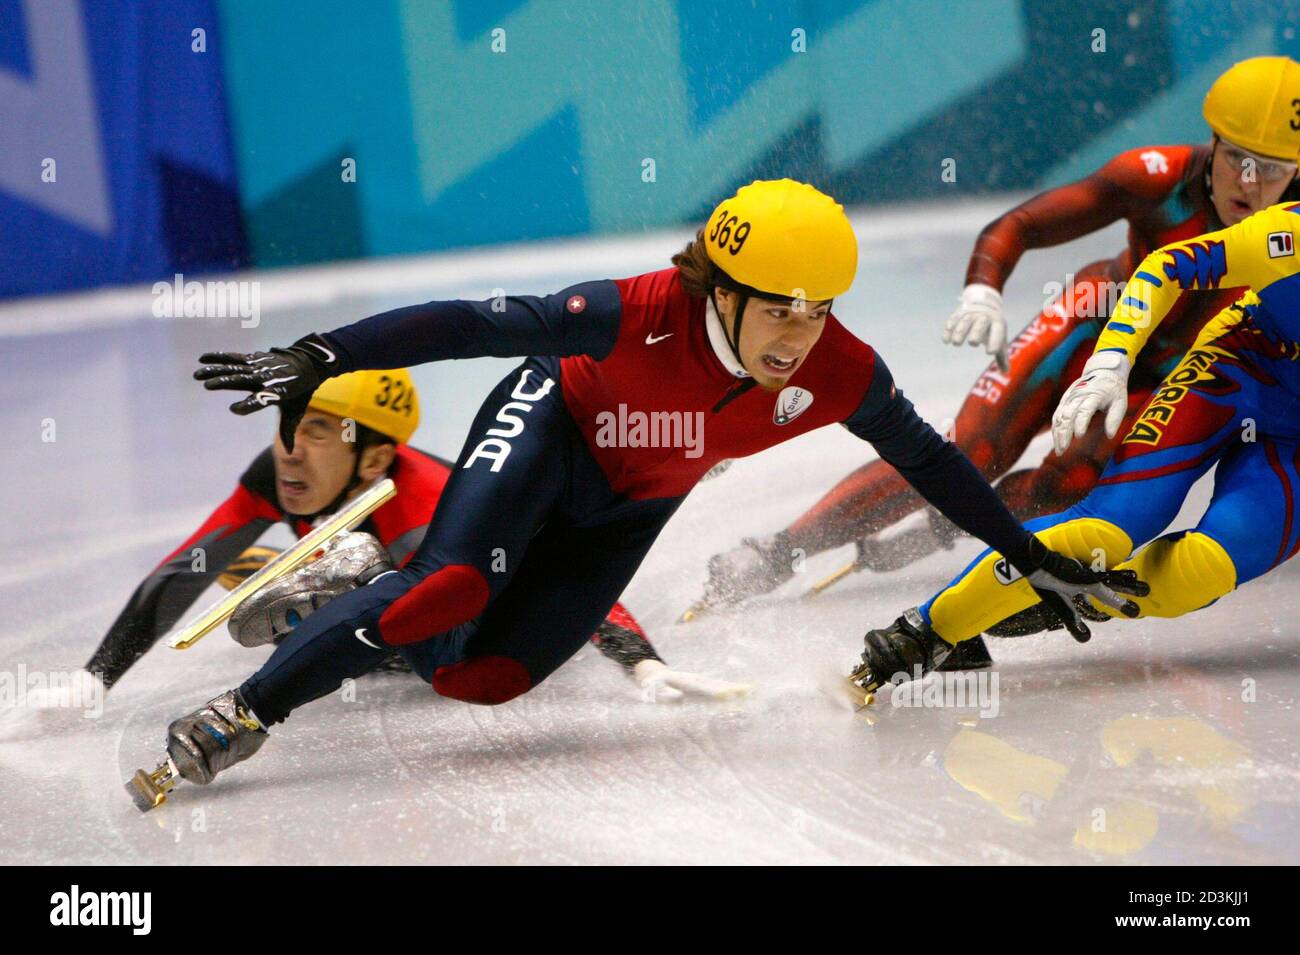 Li Jiajun (L) of China slides out of control as Apolo Anton Ohno (2nd L) of  the United States and Mathieu Turcotte of Canada skate past during the  men's 1000m short track